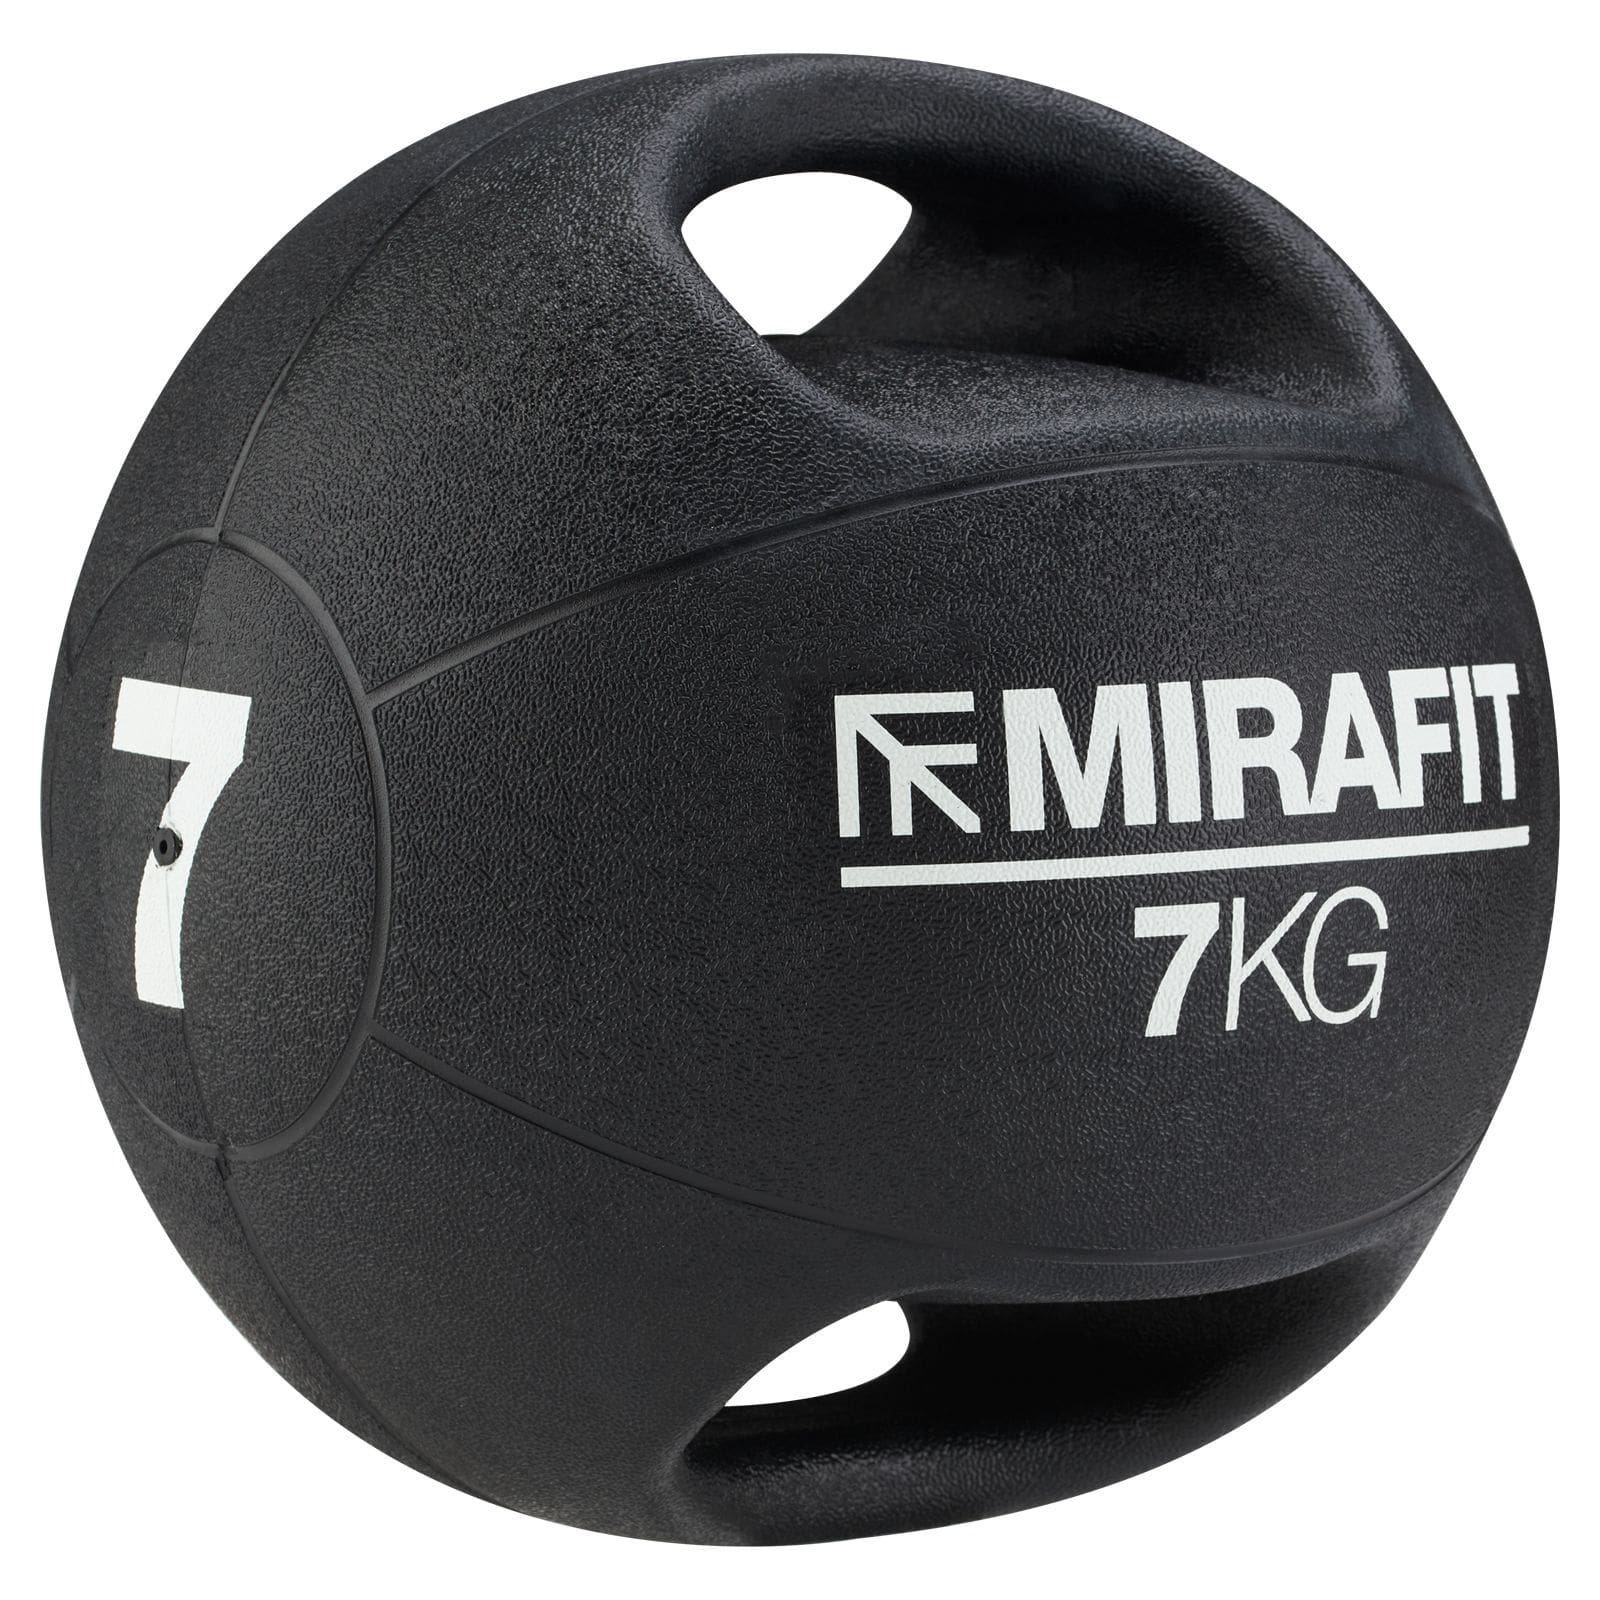 Weights of the Mirafit medicine ball with handles 7kg Review